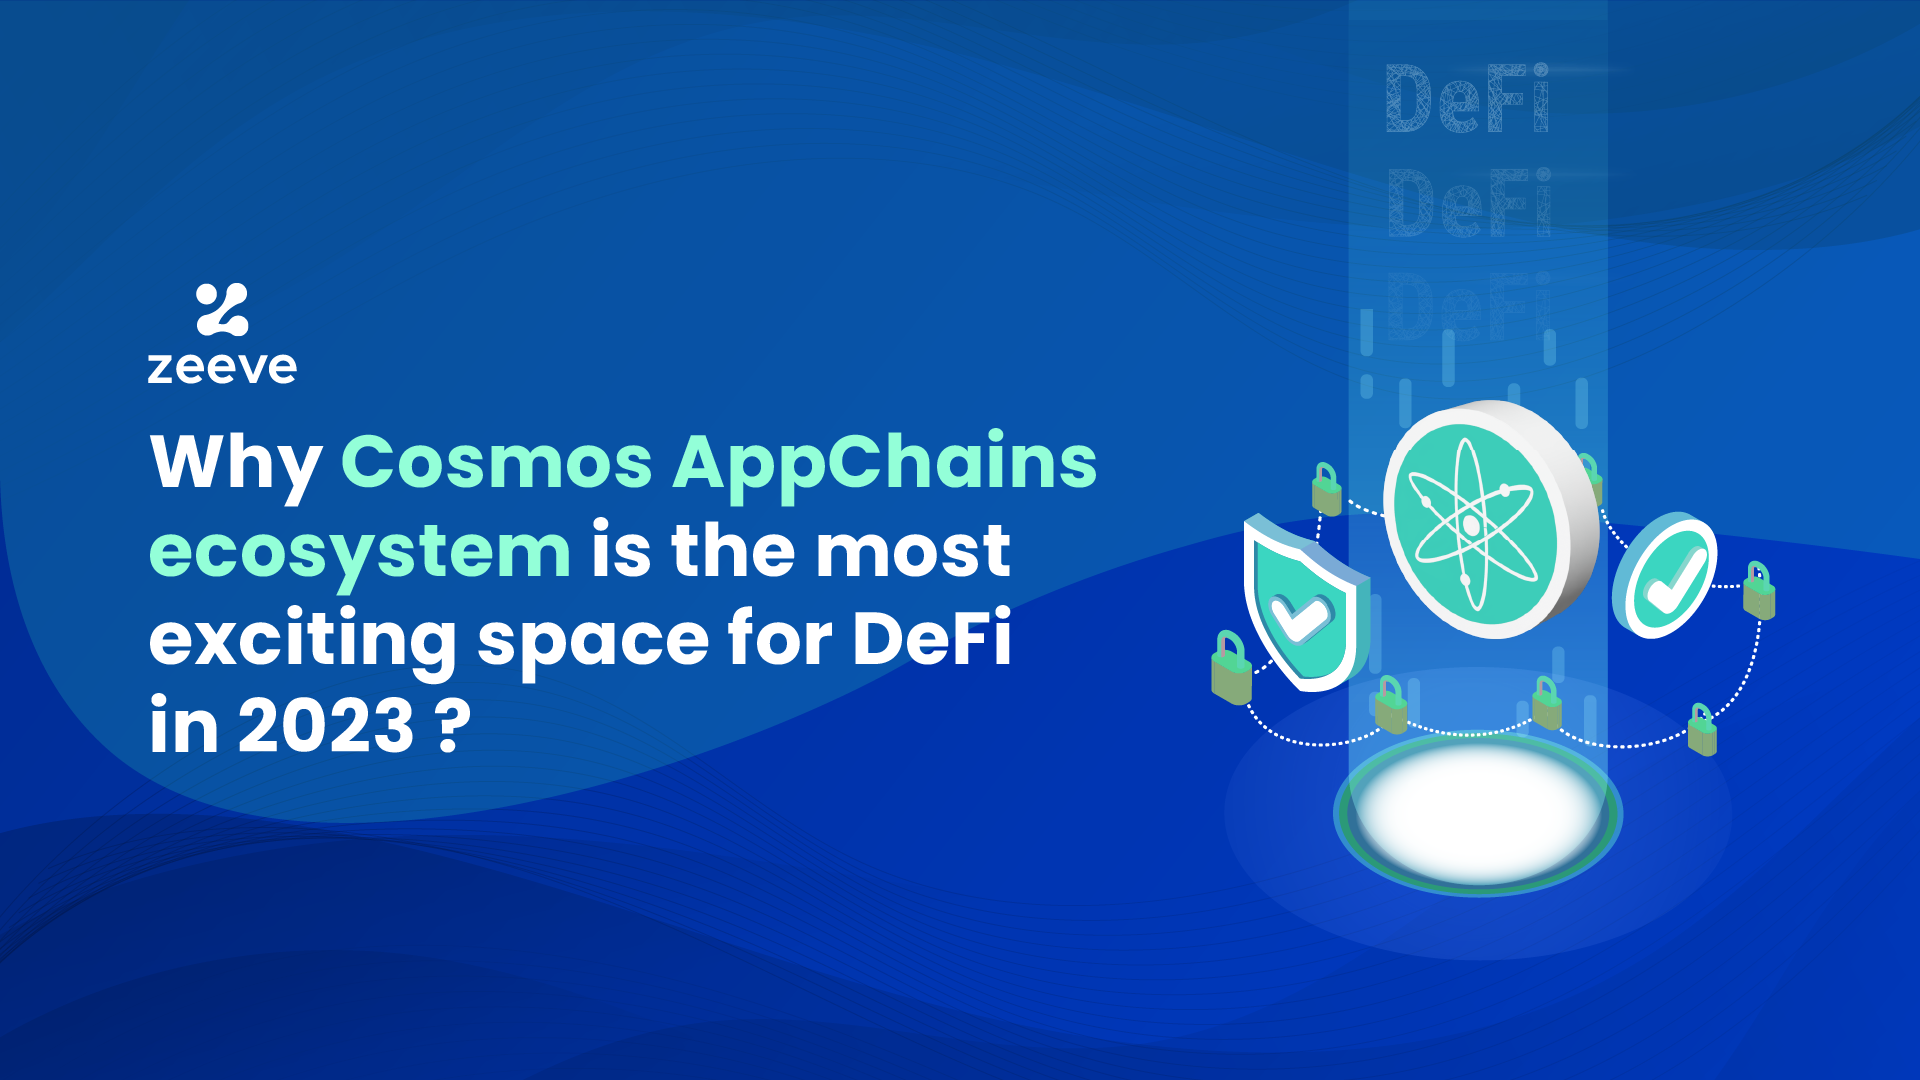 Cosmos AppChains for DeFi